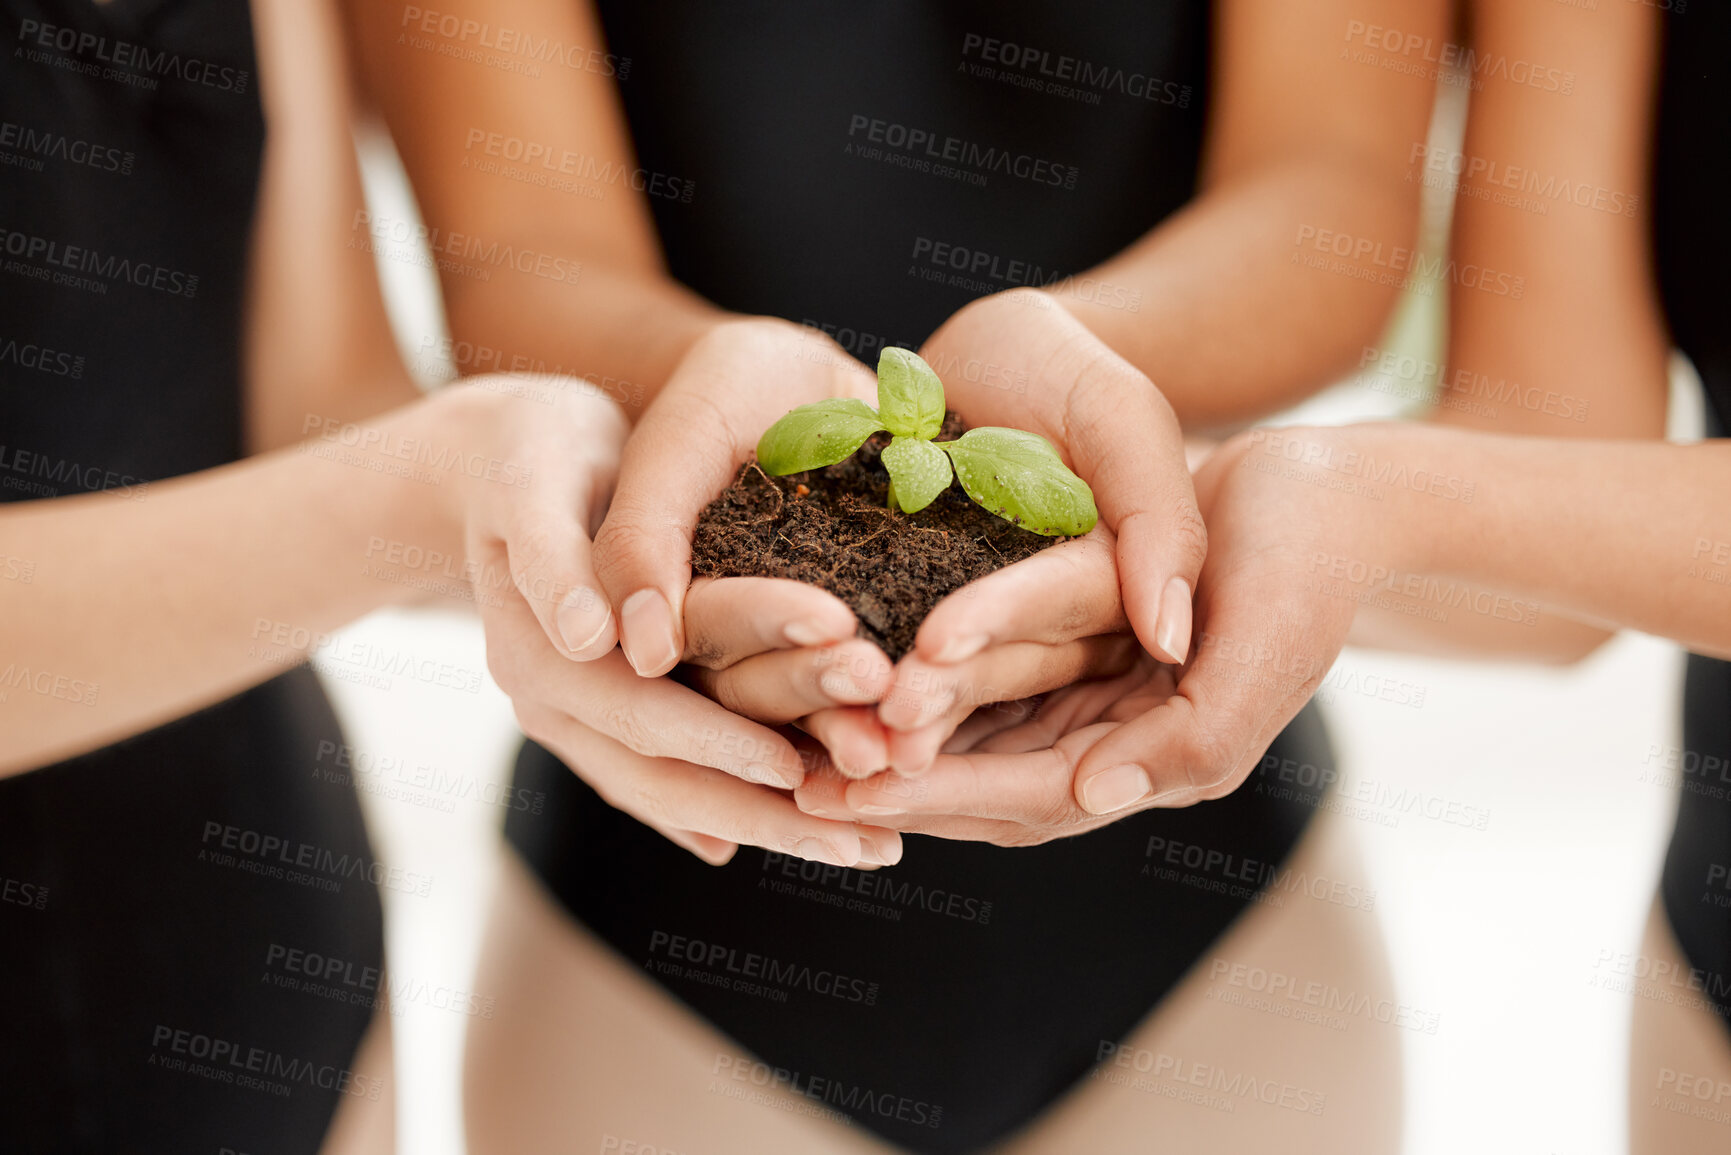 Buy stock photo Shot of a group of unrecognizable ballet dancers holding a plant growing out of soil